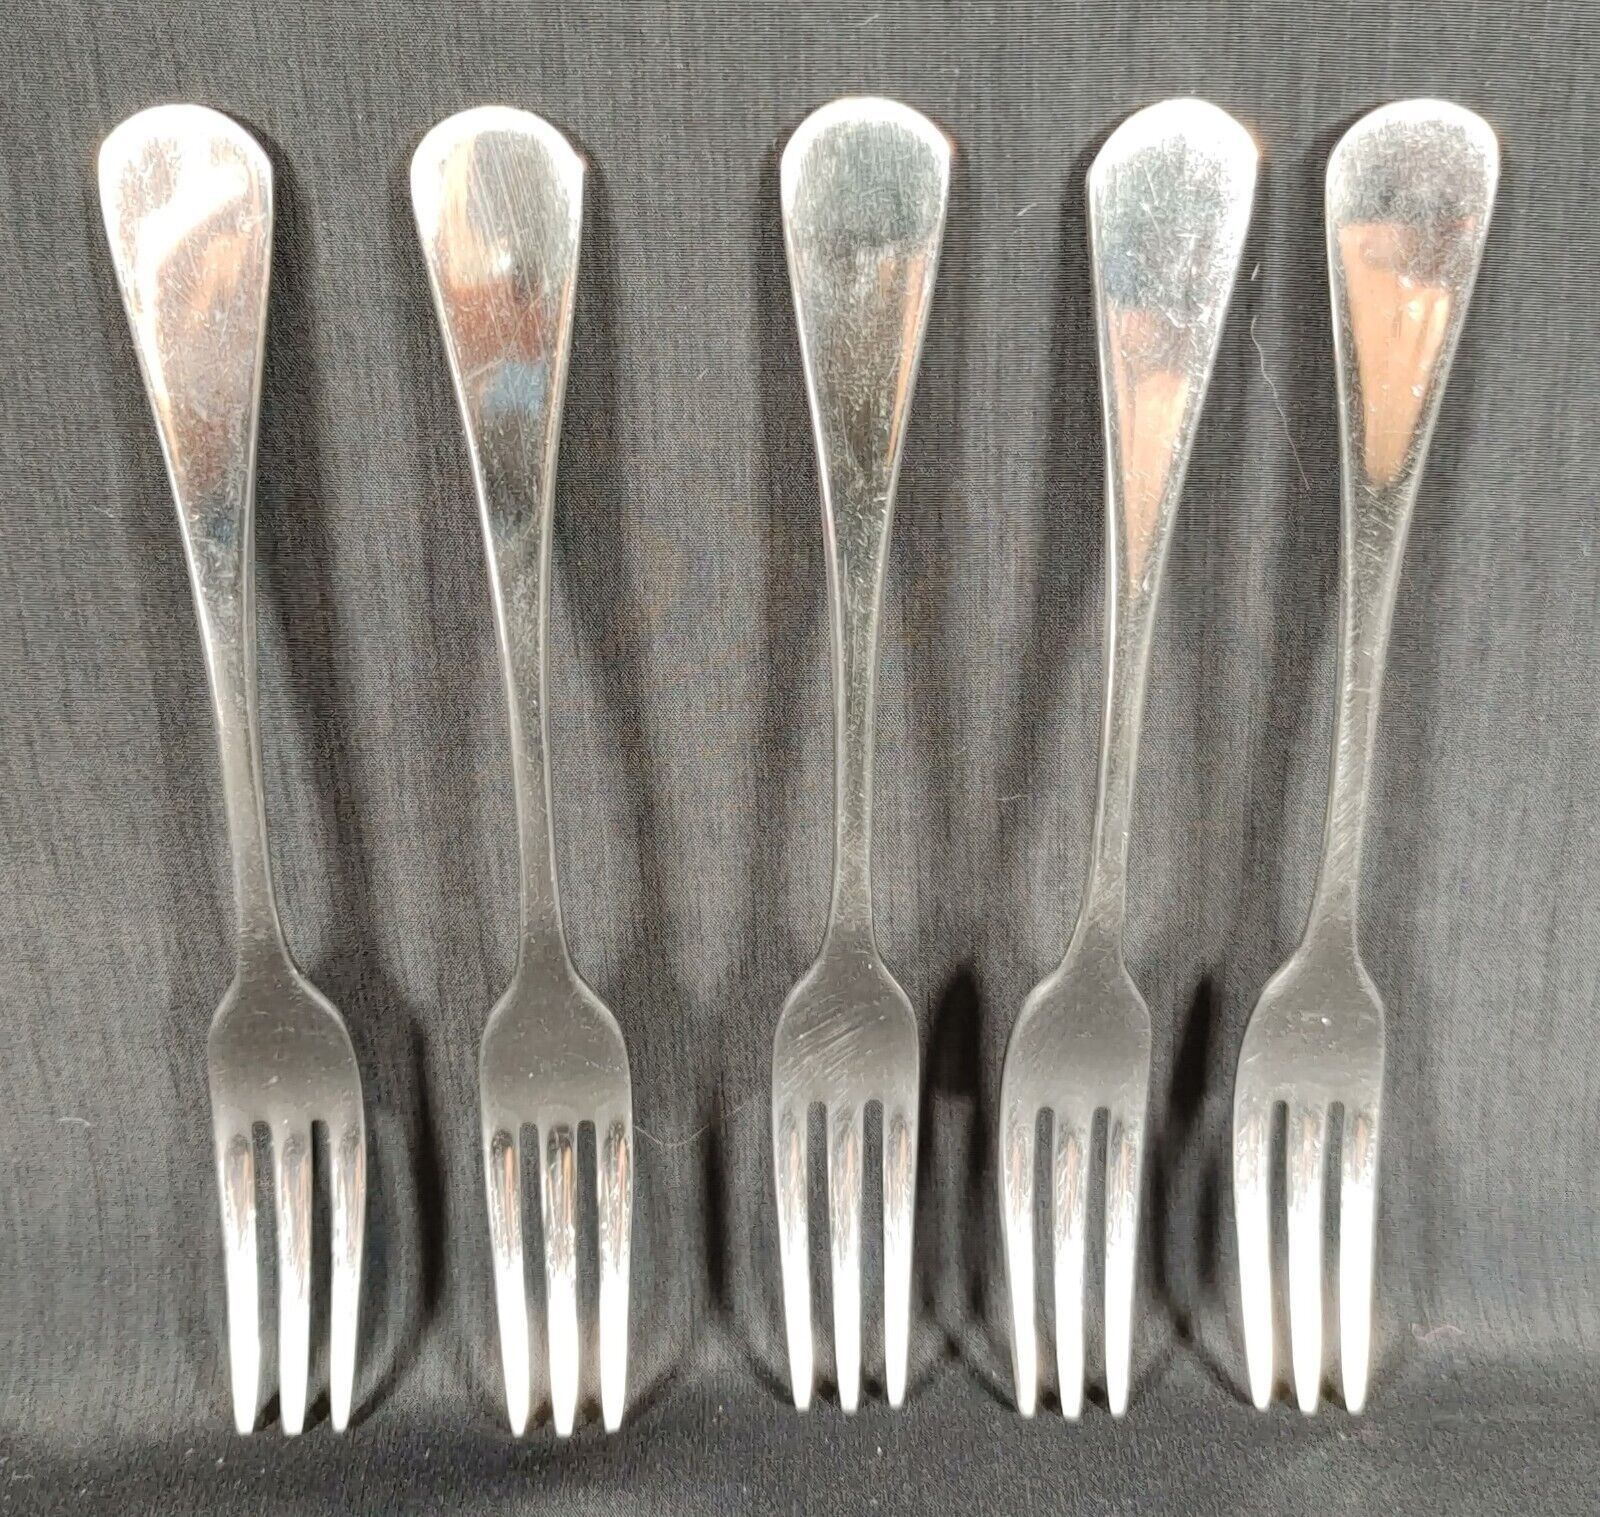 5 Stainless 18/10 Cocktail or Seafood Forks by Dansk in the Silhouette Pattern